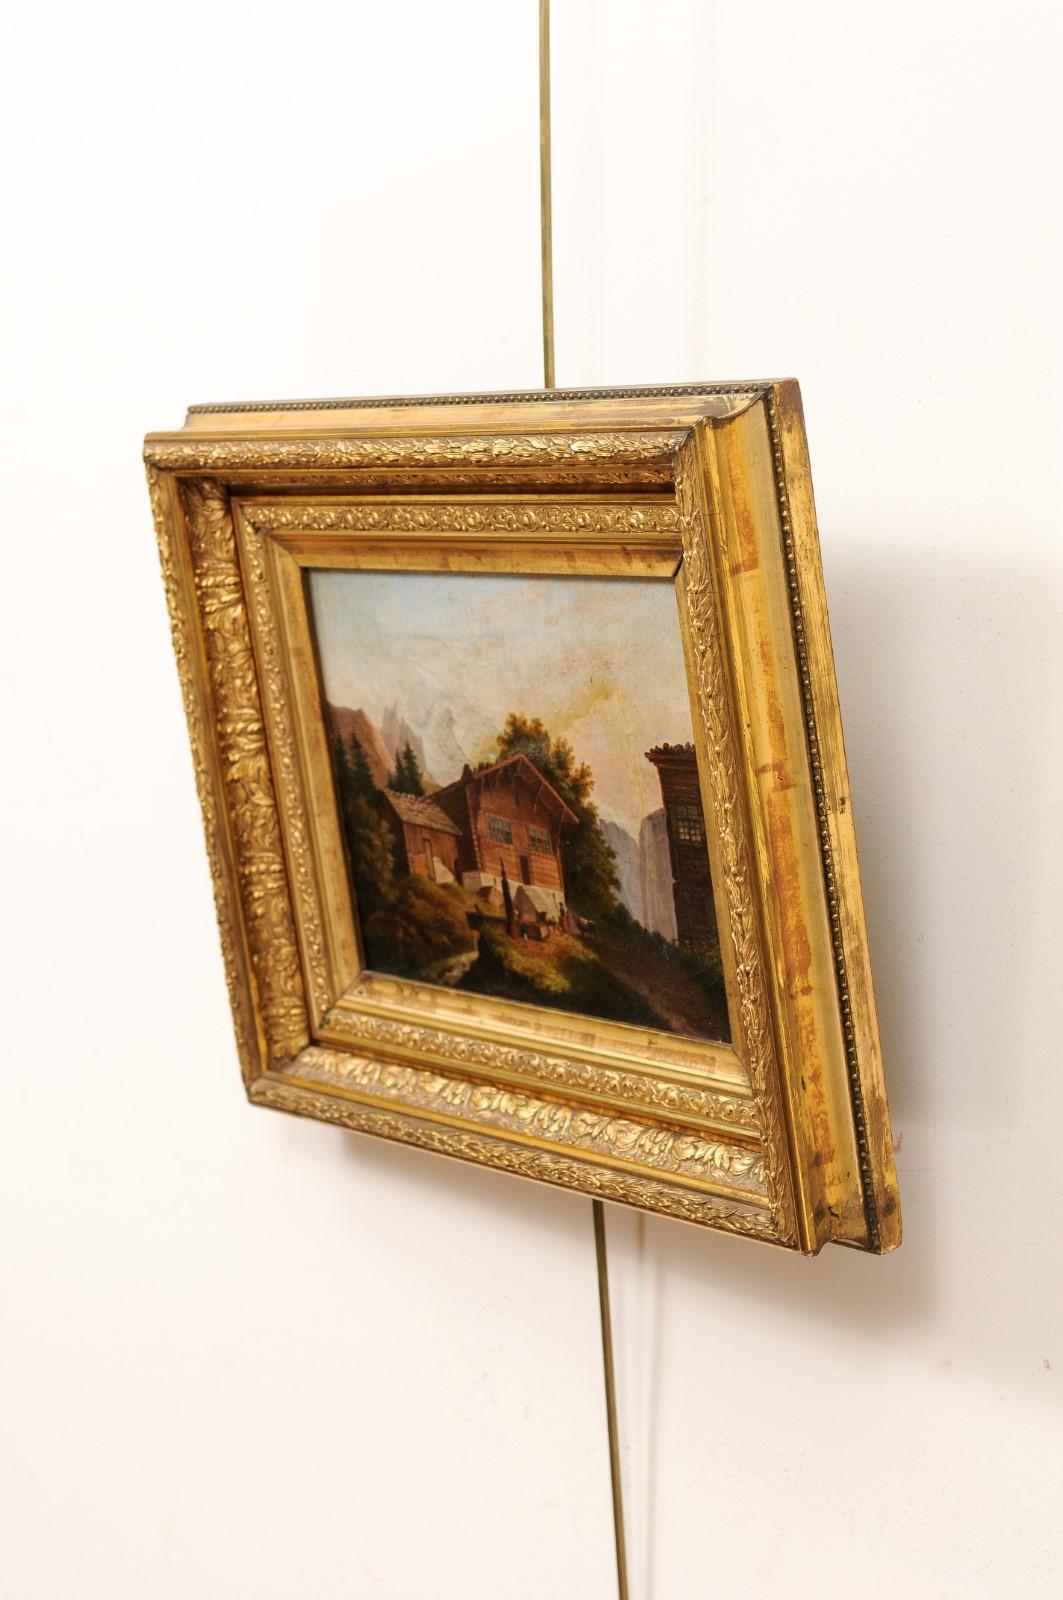  Giltwood Framed Oil on Canvas Painting of Chalet, 19th Century For Sale 6